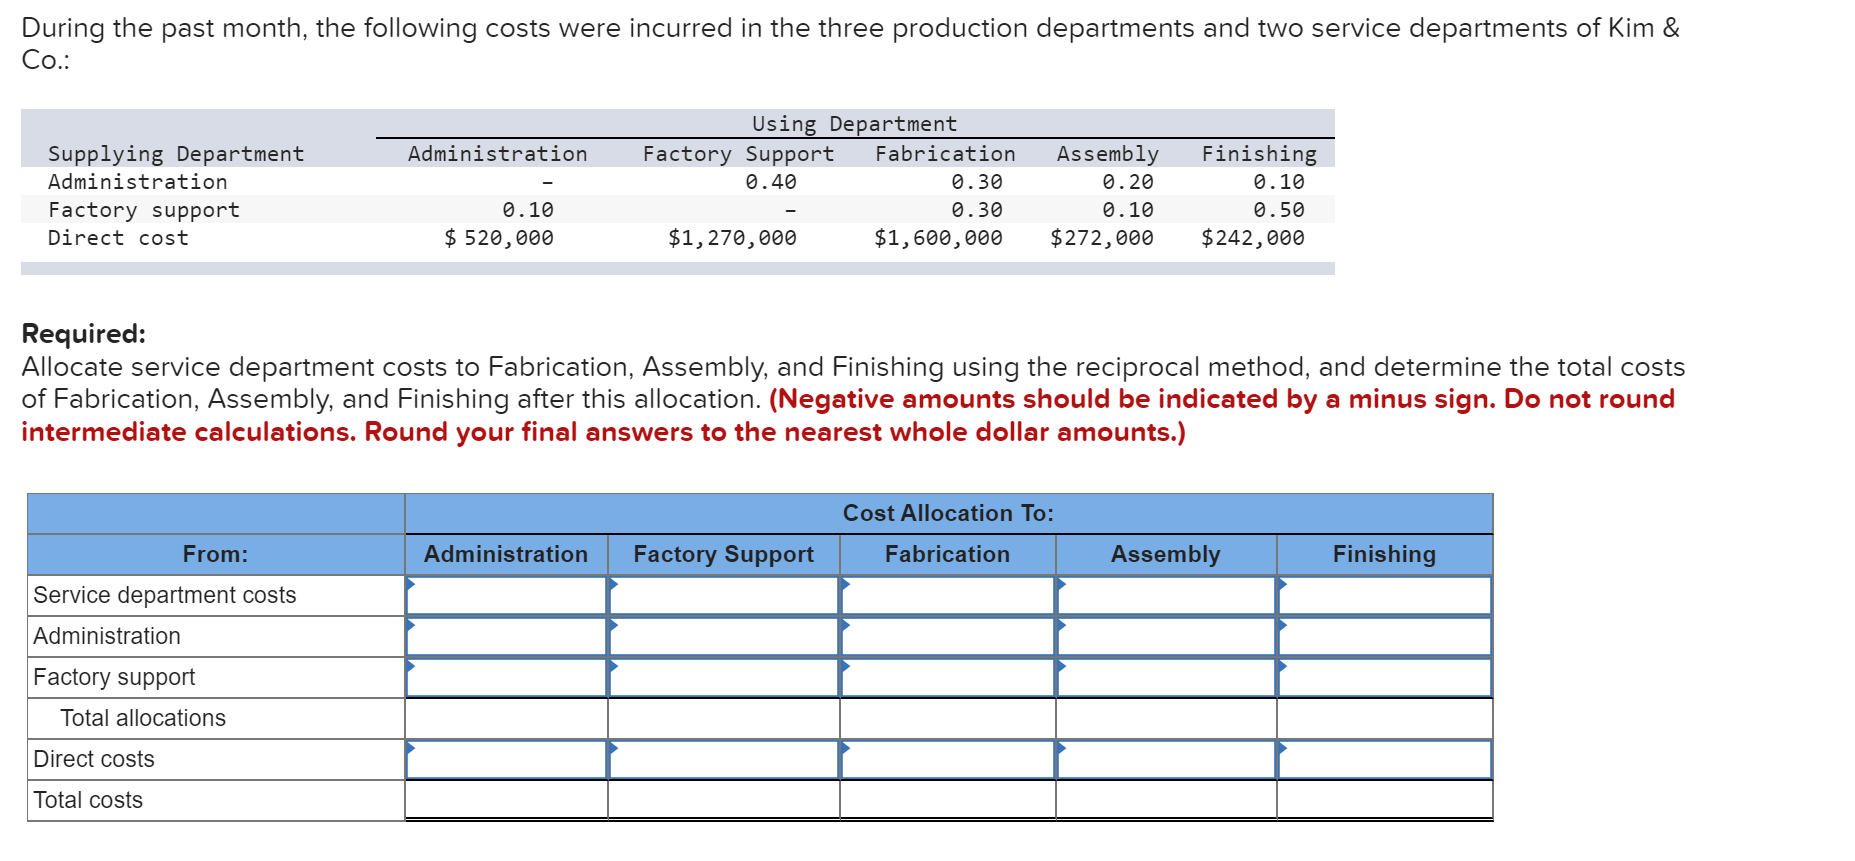 During the past month, the following costs were incurred in the three production departments and two service departments of Kim &
Co.
Using Department
Finishing
Assembly
Supplying Department
Administration
Fabrication
Factory Support
Administration
0.40
0.30
0.20
0.10
0.10
Factory support
0.30
0.10
0.50
520,000
$1,270,000
$1,600,000
$272,000
$242,000
Direct cost
Required:
Allocate service department costs to Fabrication, Assembly, and Finishing using the reciprocal method, and determine the total costs
of Fabrication, Assembly, and Finishing after this allocation. (Negative amounts should be indicated by a minus sign. Do not round
intermediate calculations. Round your final answers to the nearest whole dollar amounts.)
Cost Allocation To:
Factory Support
From:
Administration
Fabrication
Assembly
Finishing
Service department costs
Administration
Factory support
Total allocations
Direct costs
Total costs
